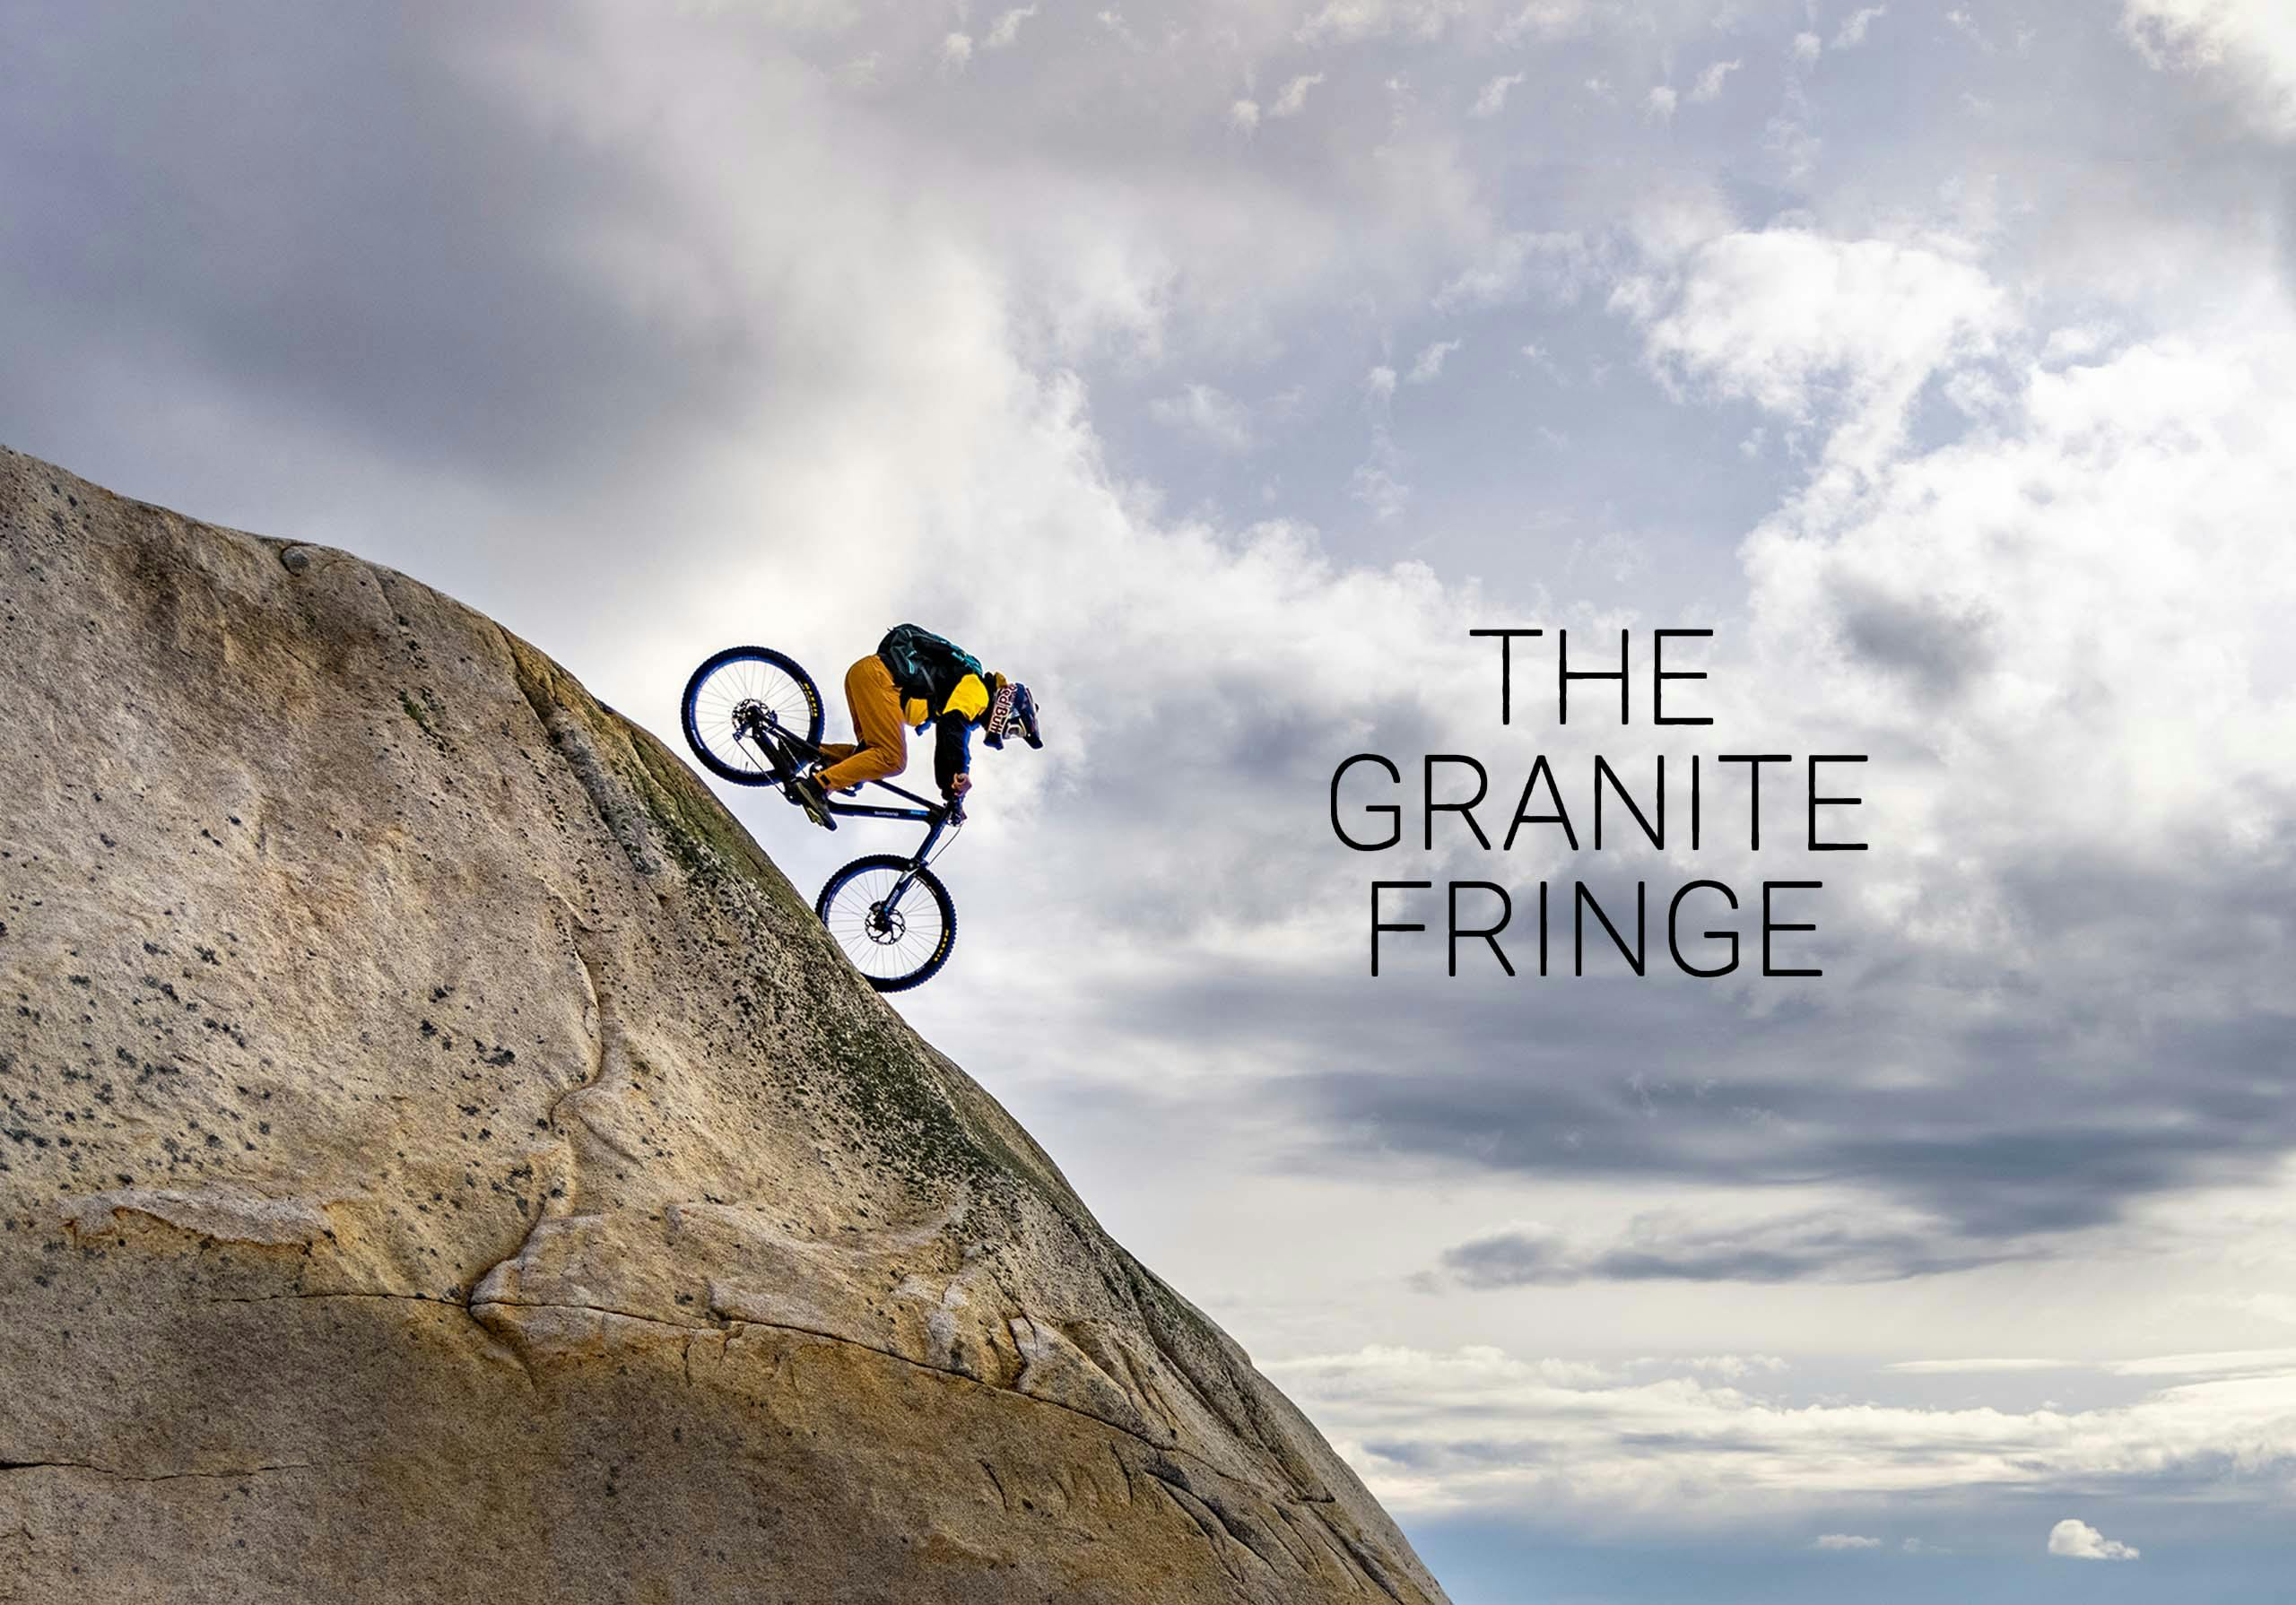 A mountain bike film featuring Darren Berrecloth and Kenny Smith